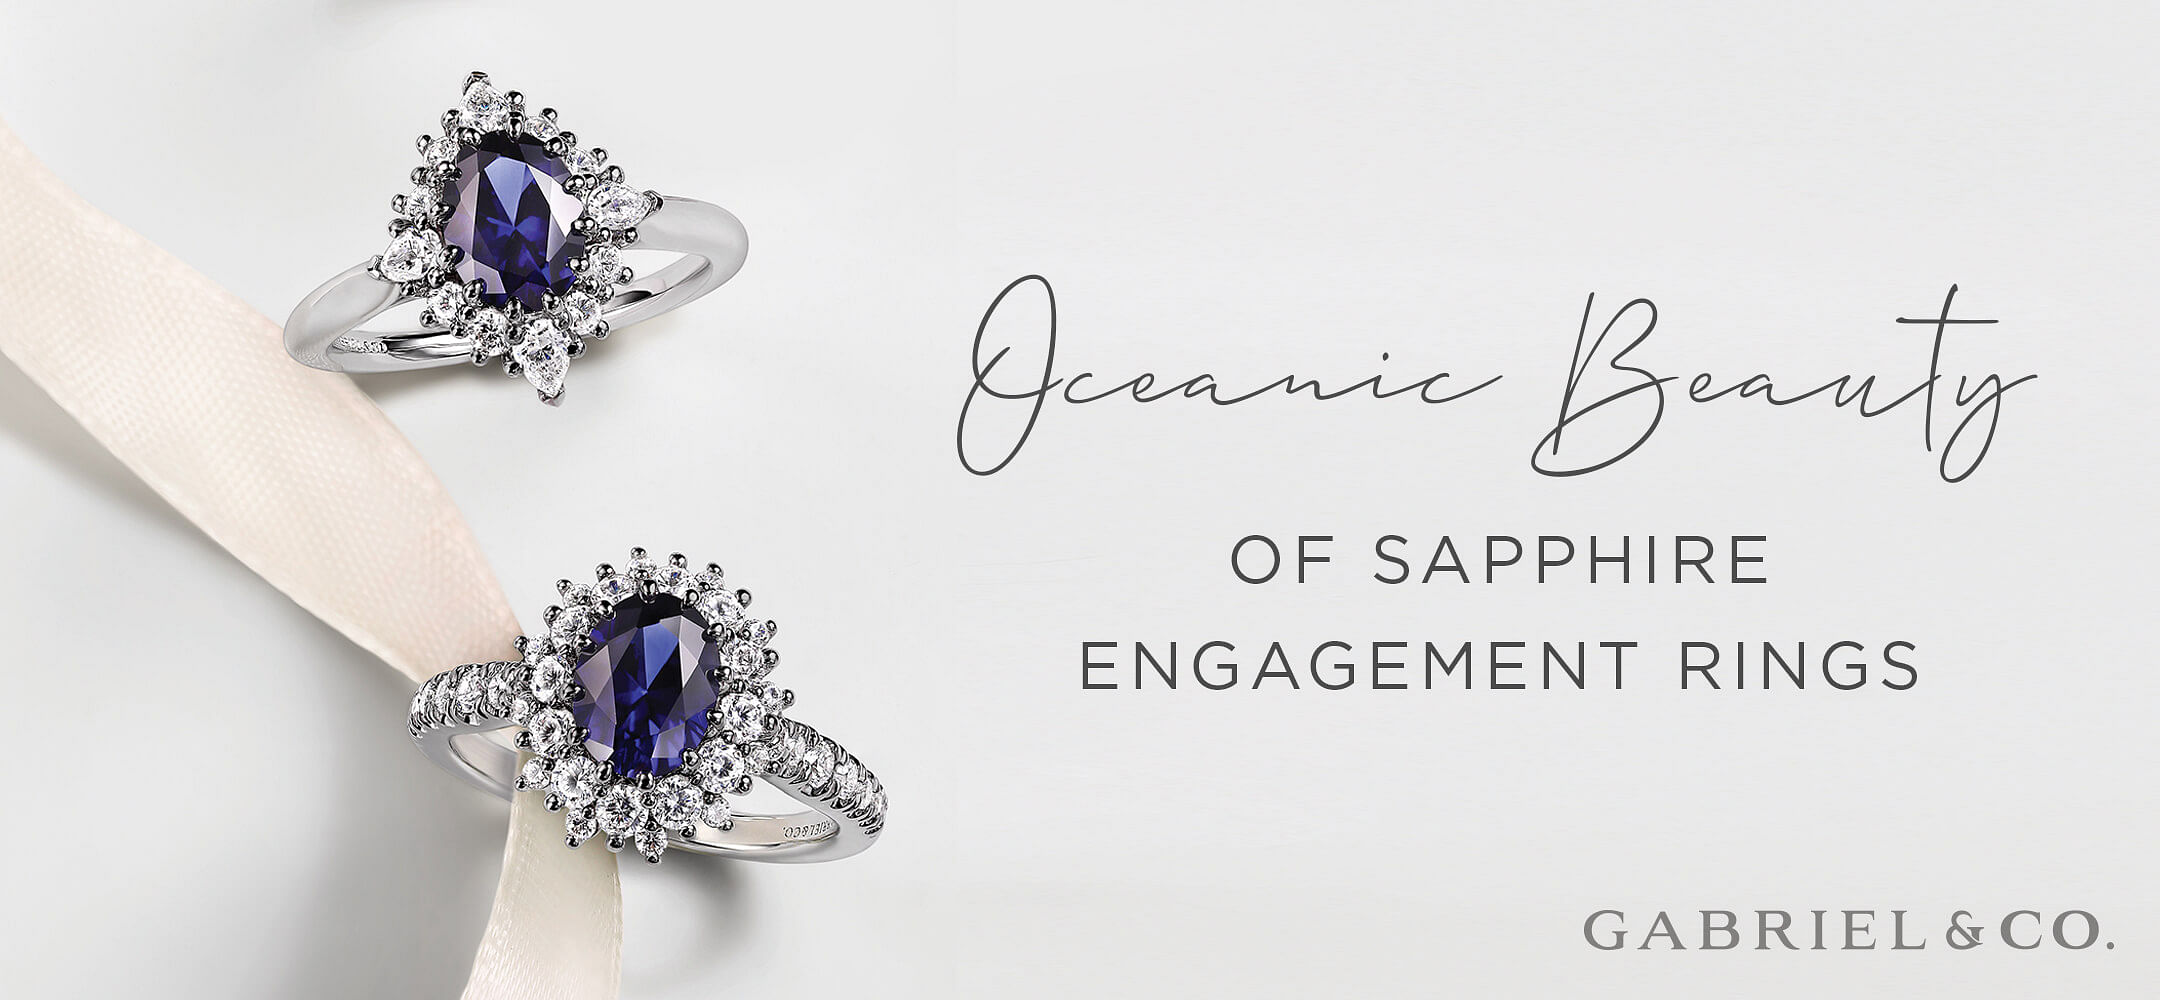 Purchase the High-Quality Sapphire Engagement Rings | GLAMIRA.com